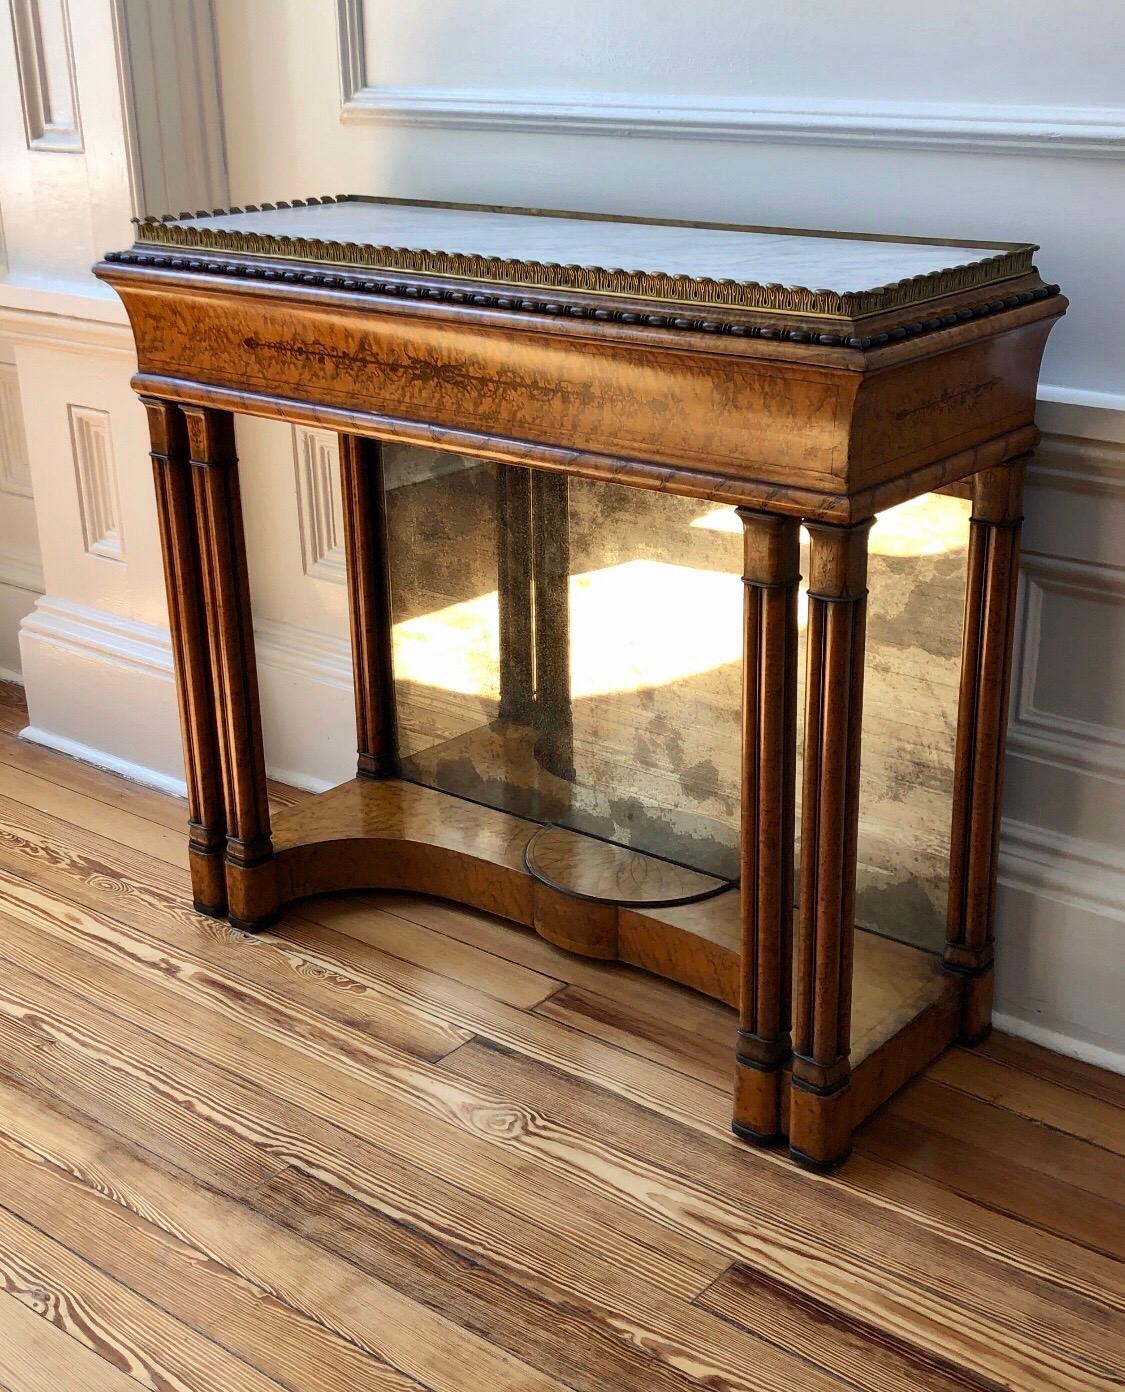 19th C. French Charles X Inlaid Birdseye Maple Jardinière Planter / Console In Good Condition For Sale In Charleston, SC